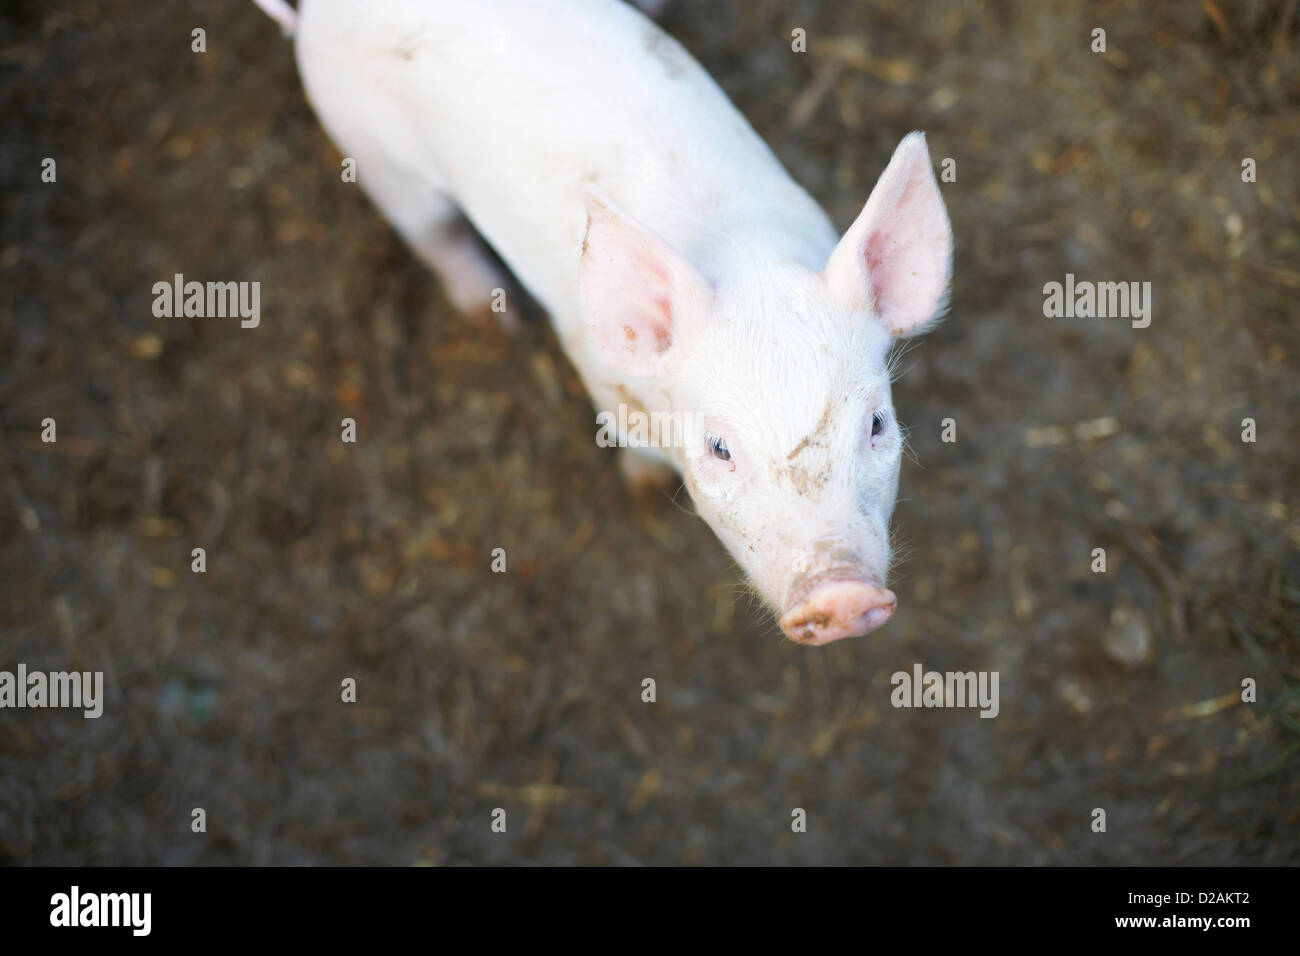 Pig standing in dirt field Banque D'Images